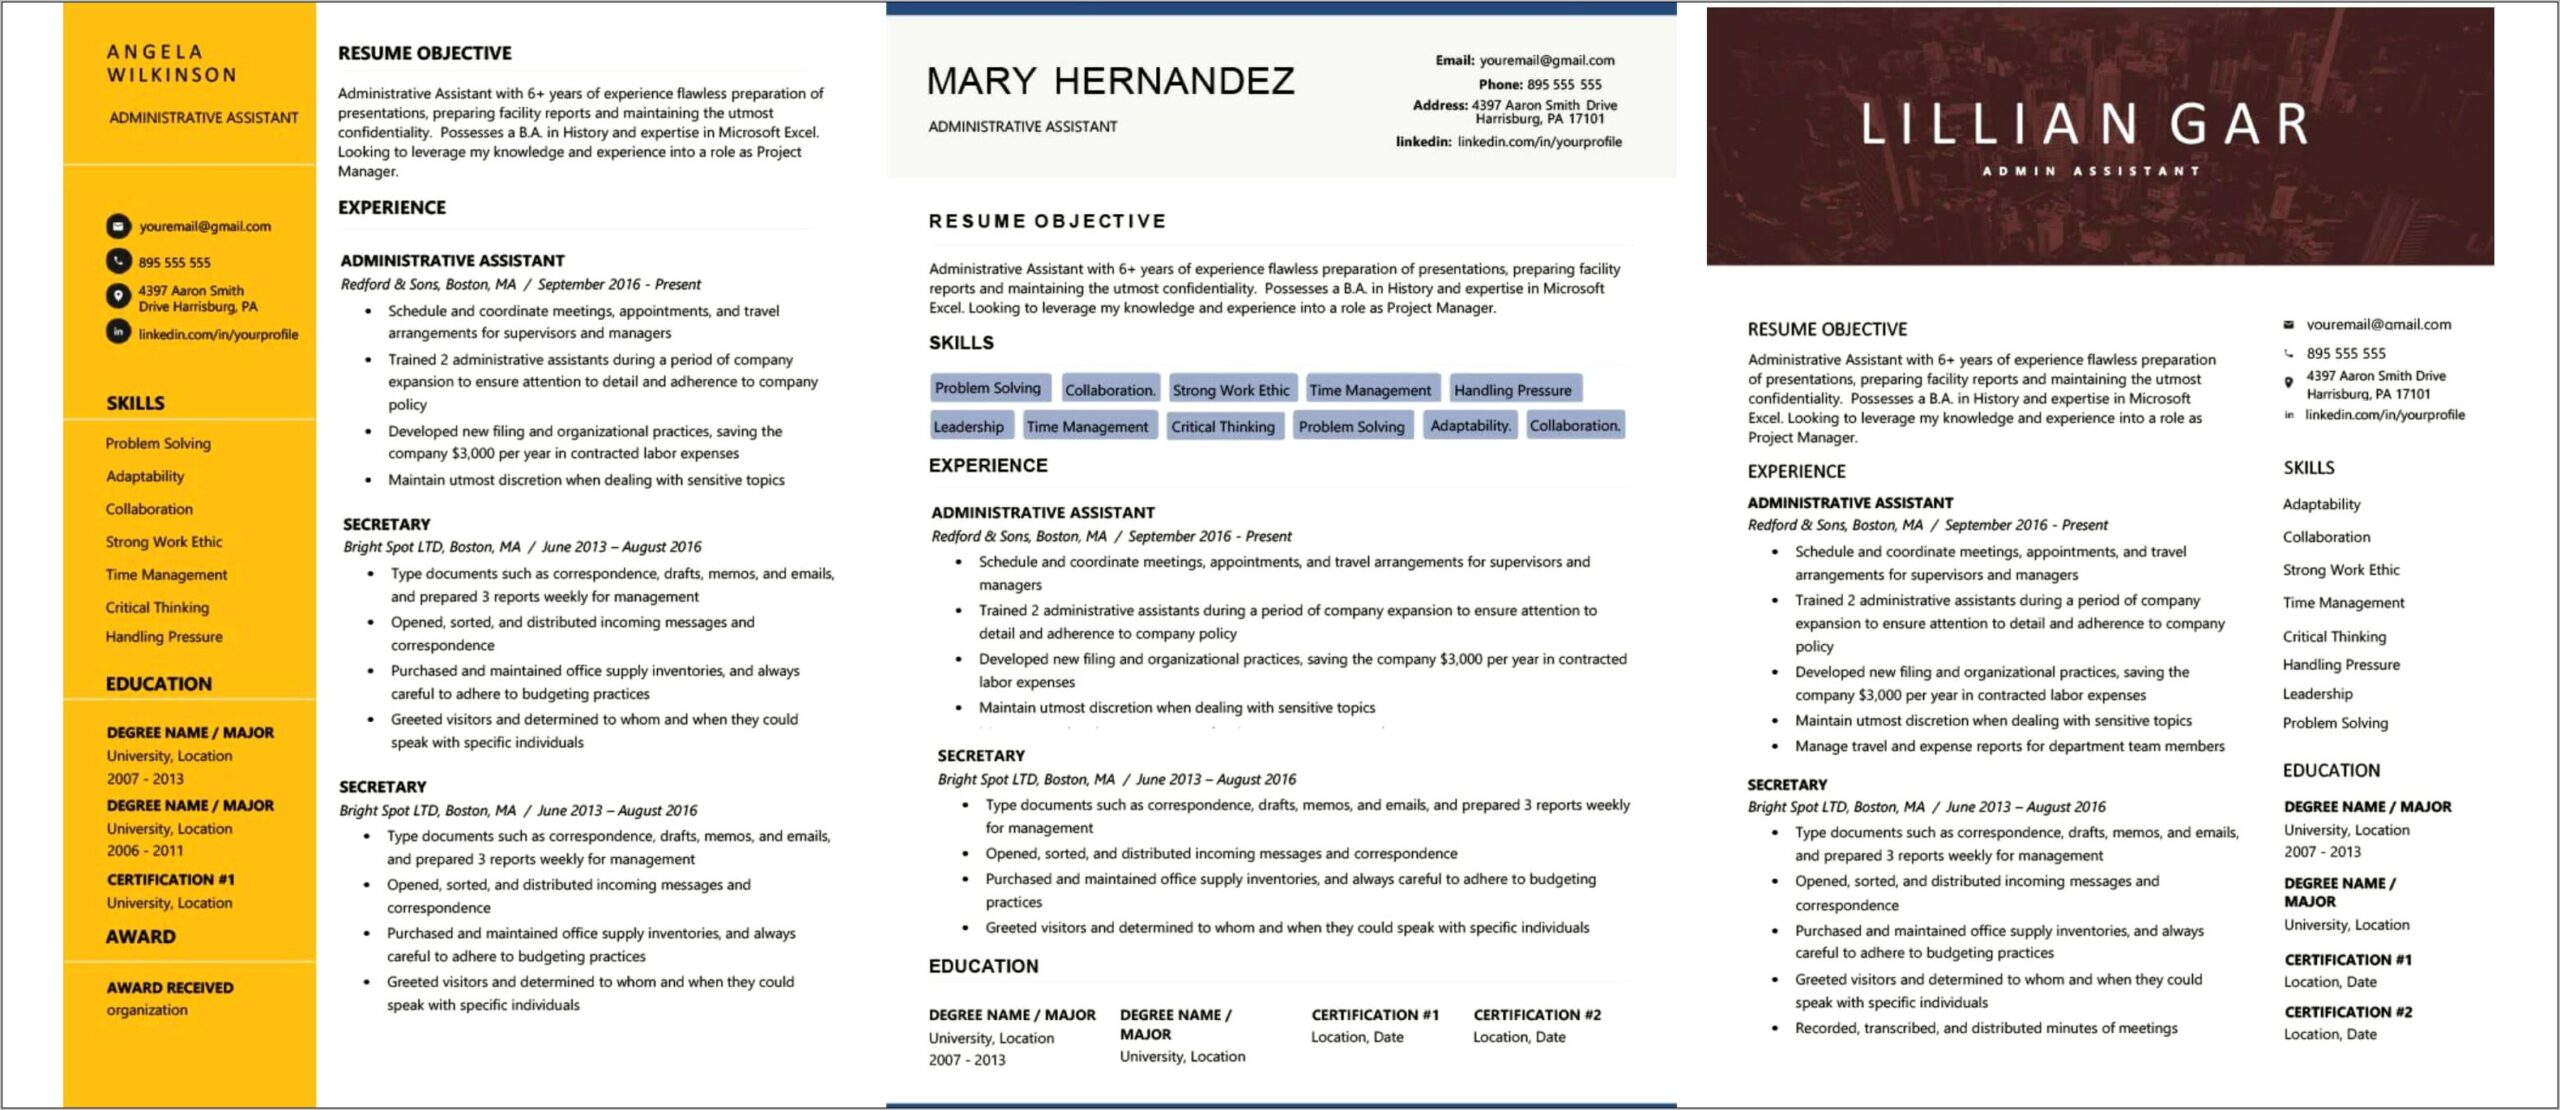 Resume Submit Junior Prject Manager